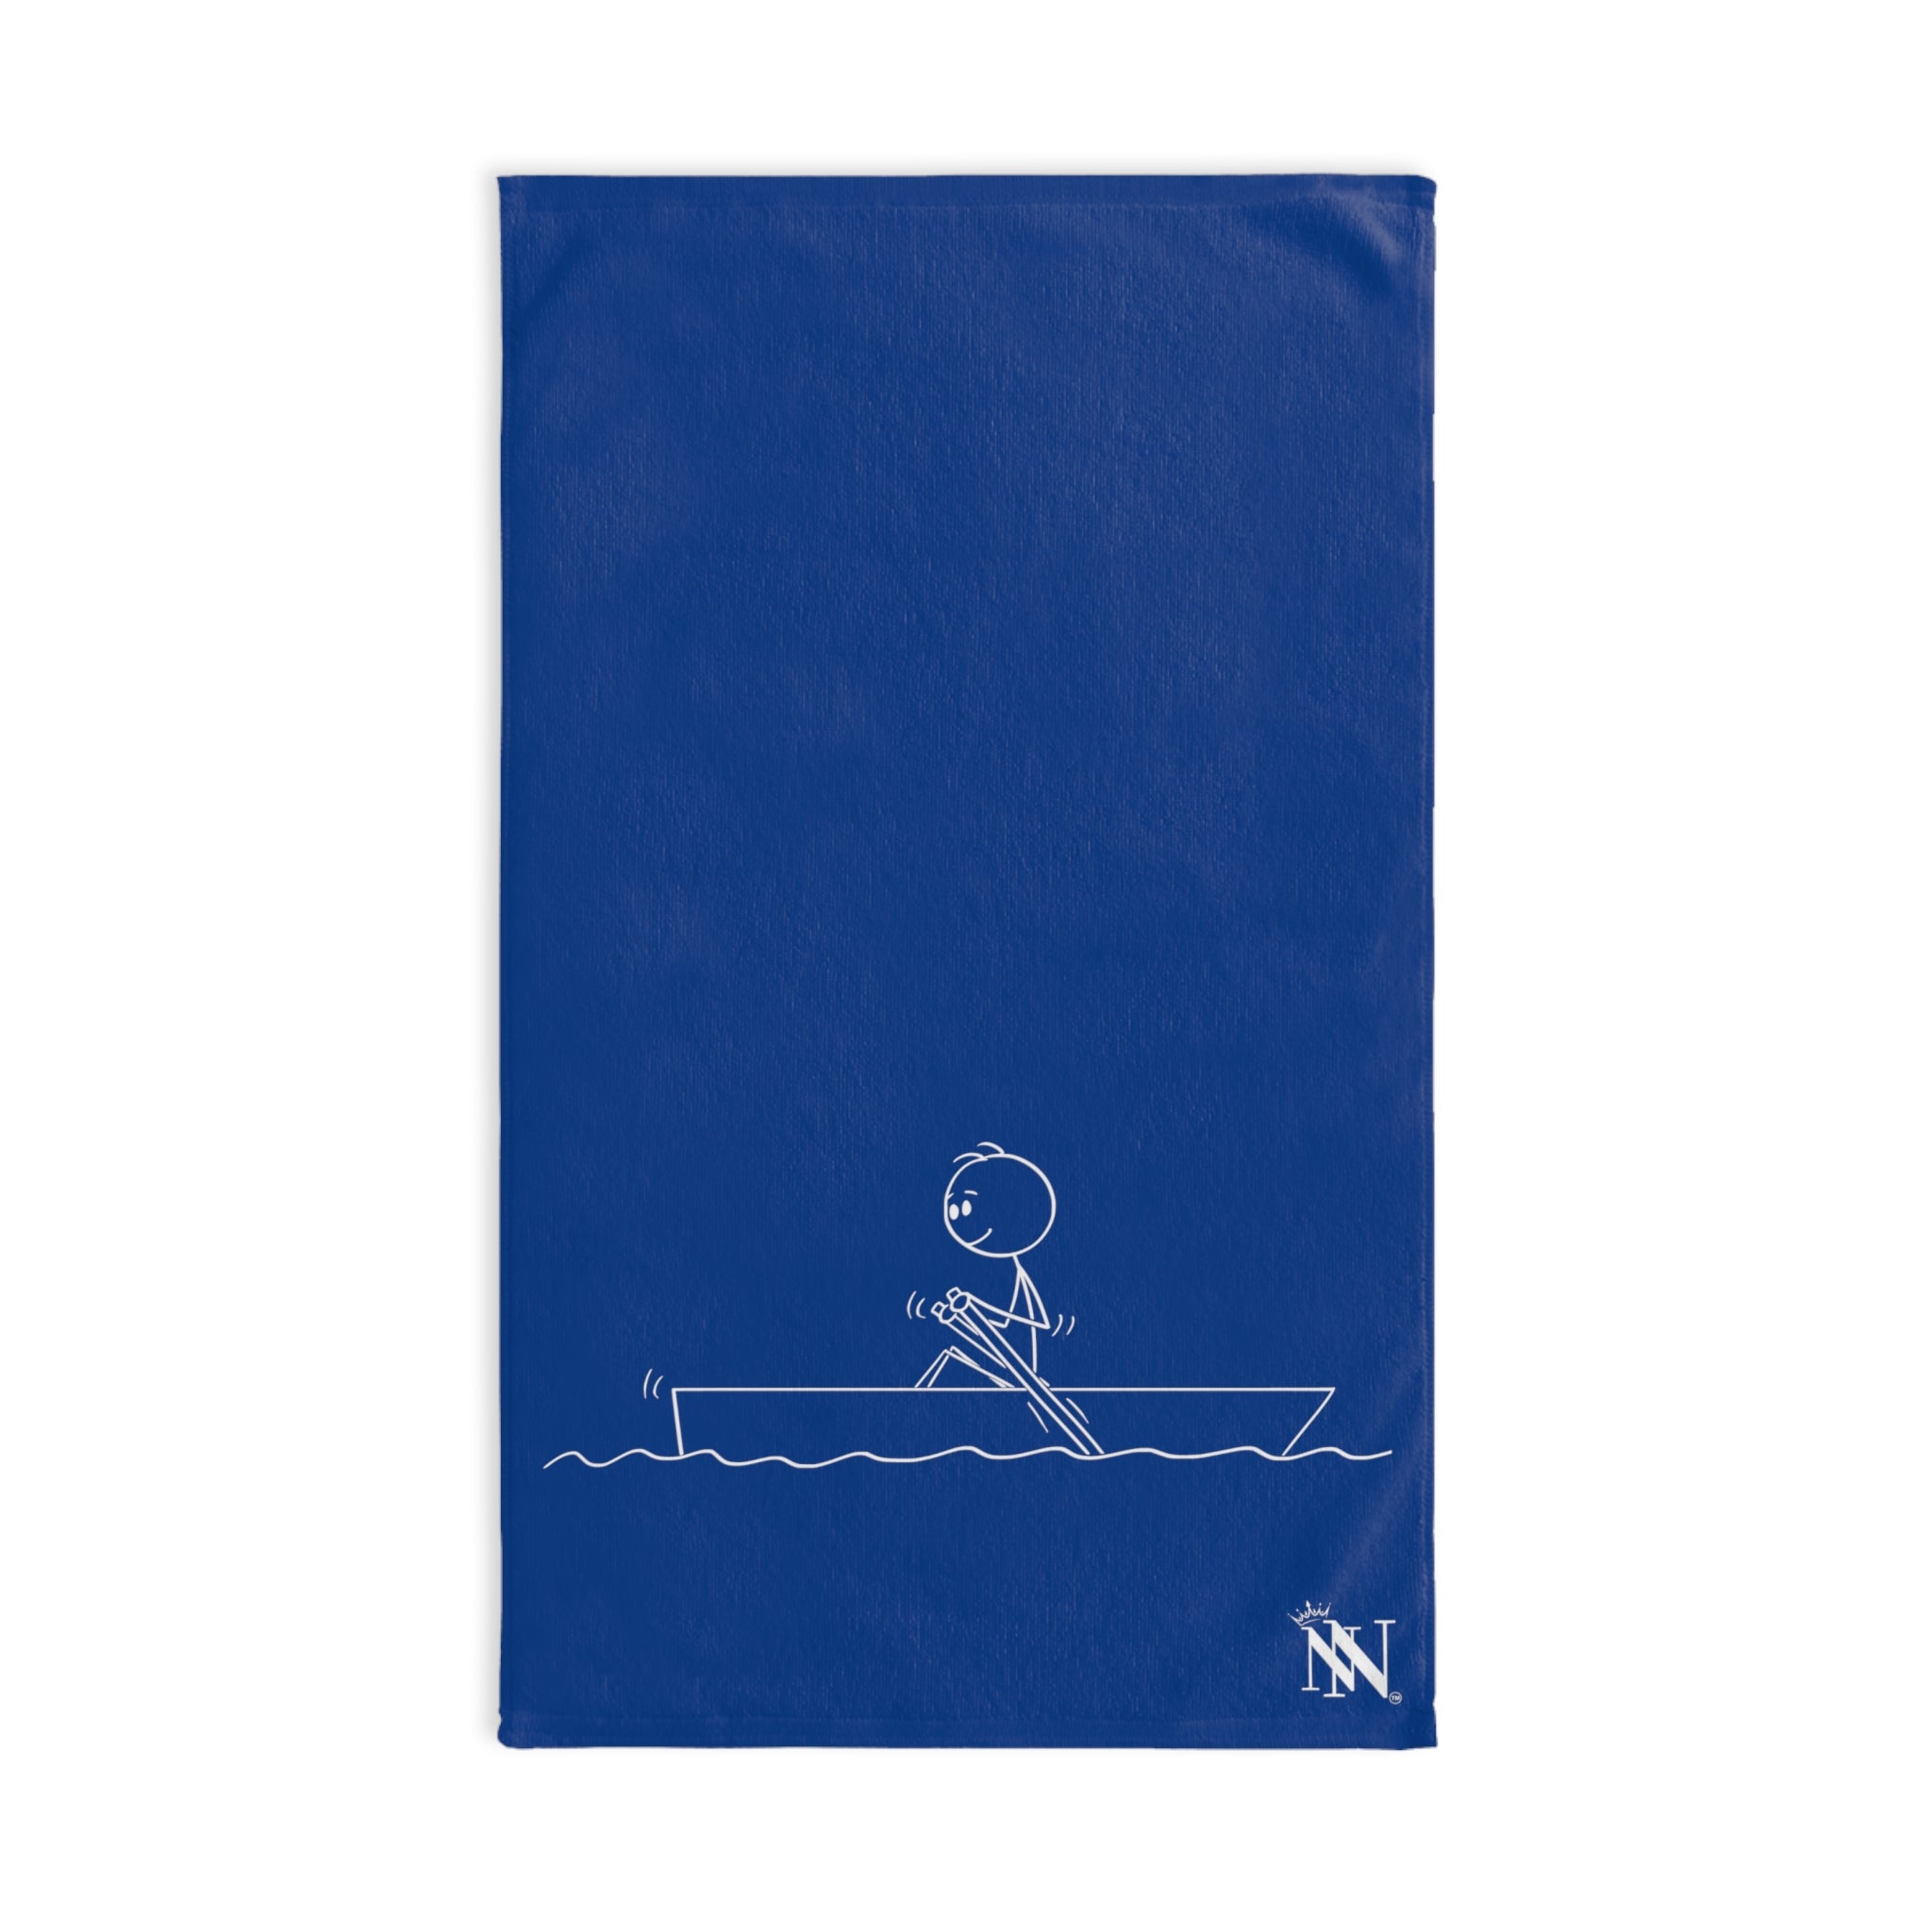 Man Stick in Boat Blue | Gifts for Boyfriend, Funny Towel Romantic Gift for Wedding Couple Fiance First Year Anniversary Valentines, Party Gag Gifts, Joke Humor Cloth for Husband Men BF NECTAR NAPKINS